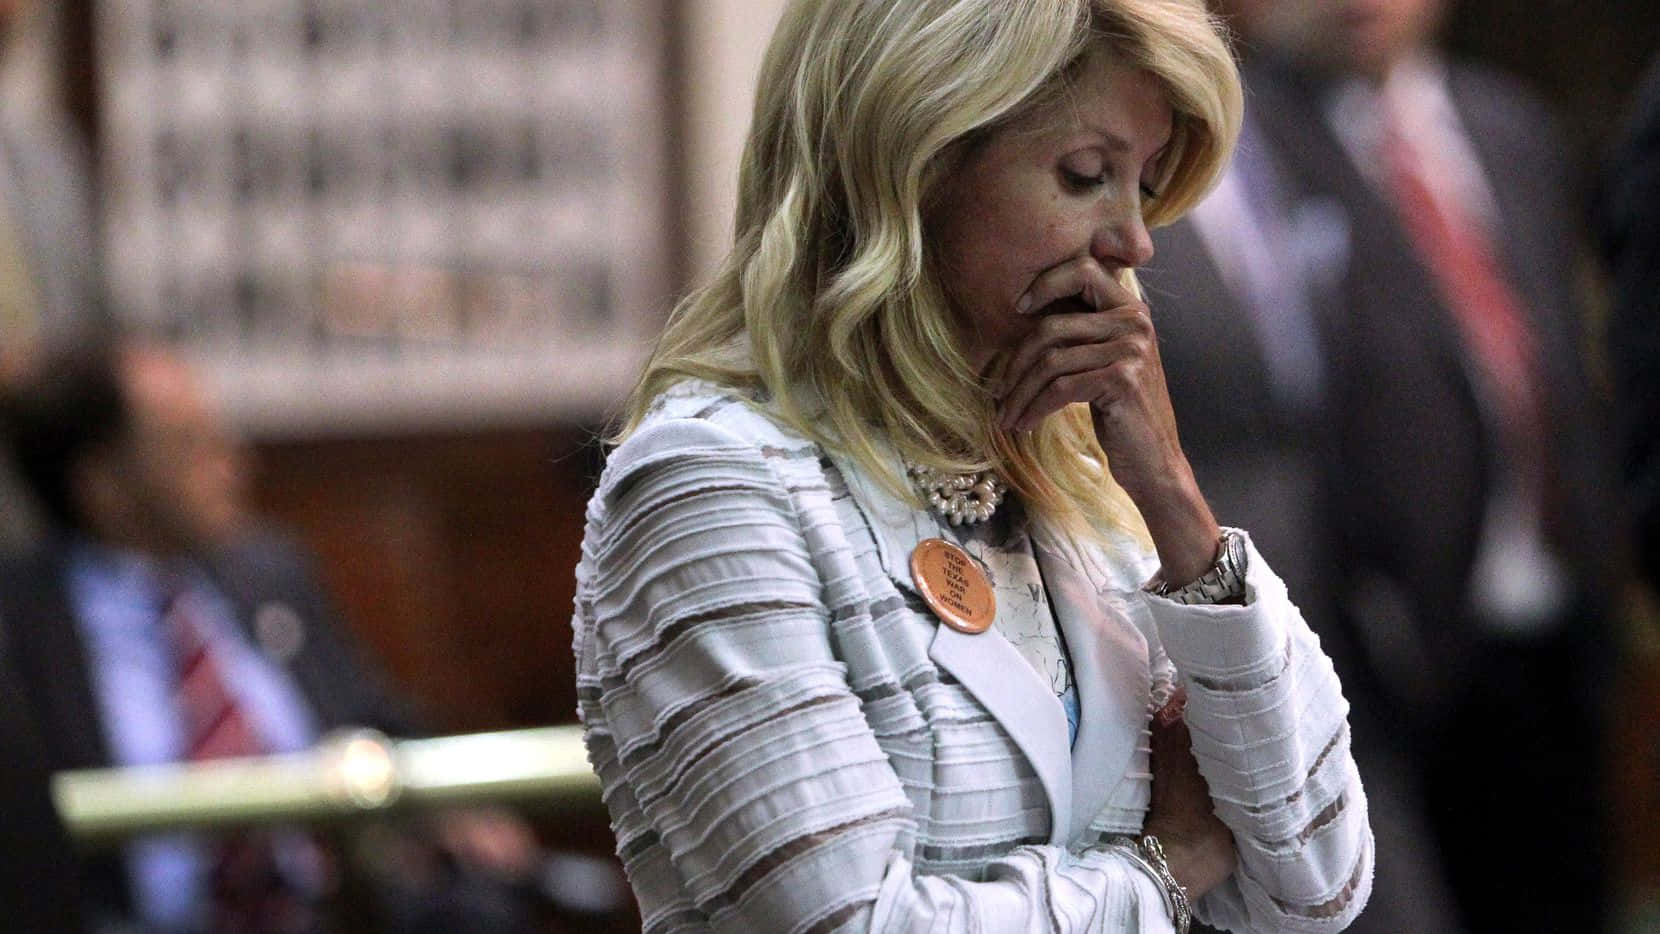 Wendy Davis in a Thoughtful Moment Wallpaper